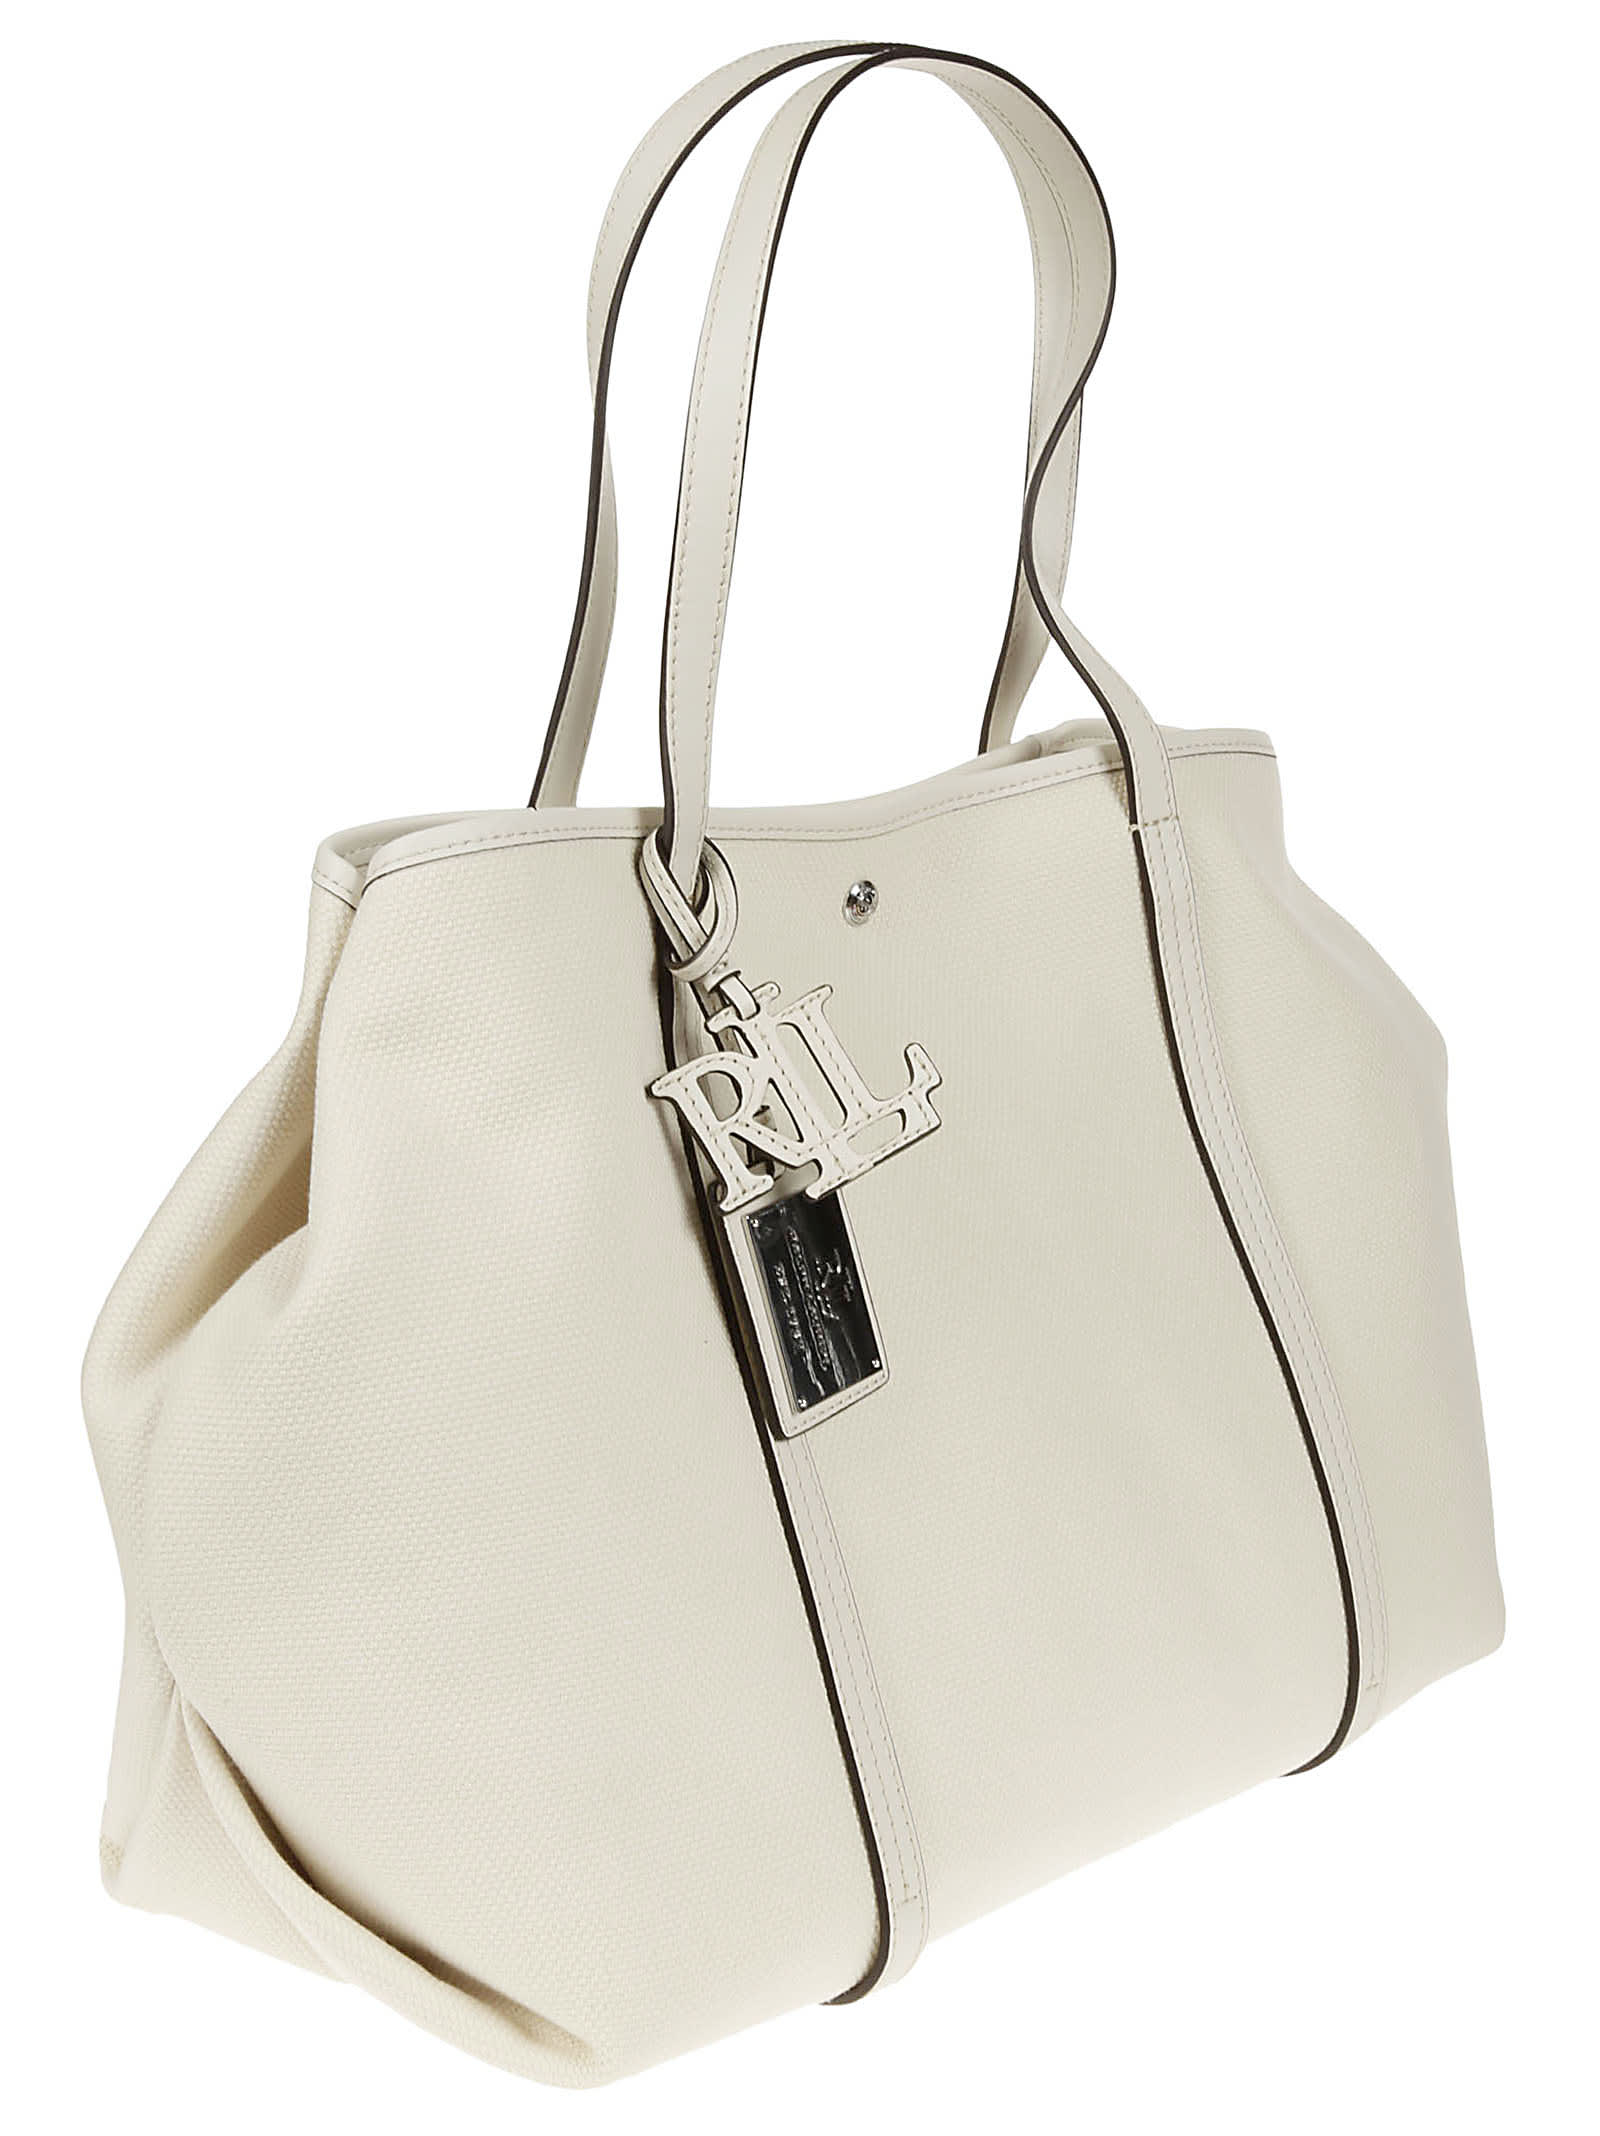 Shop Ralph Lauren Emerie Tote Tote Extra Large In Natural Soft White/soft White